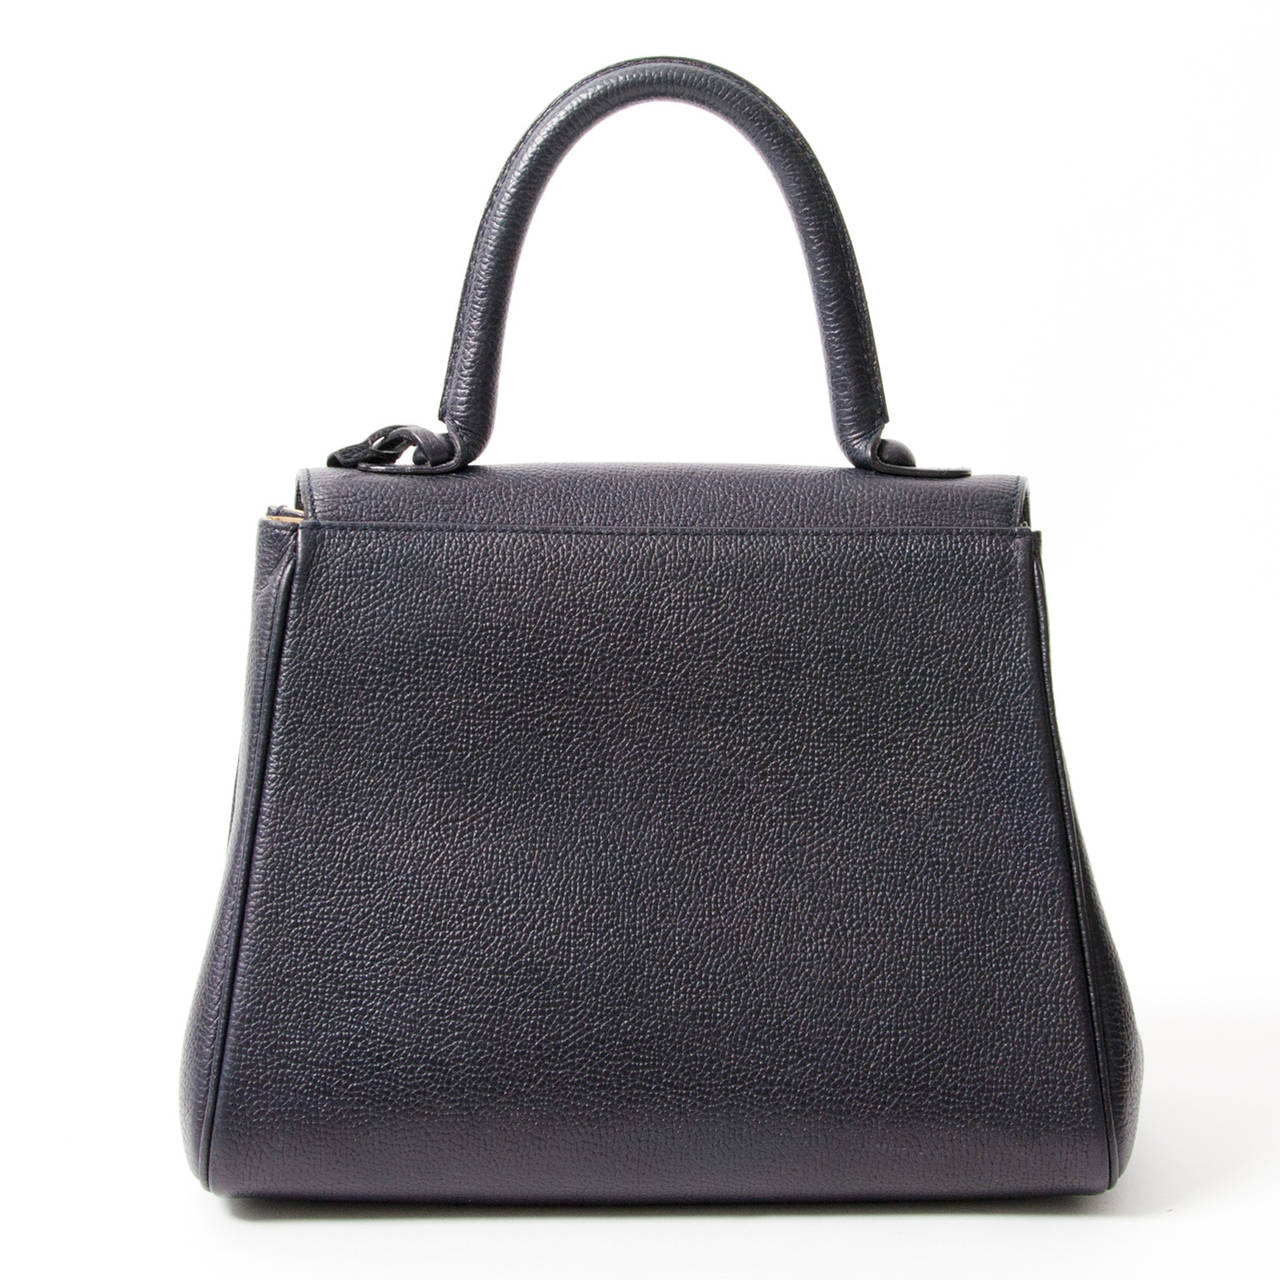 This classic satchel from premium Belgium luxury leather goods brand Delvaux excels in both style and quality. This navy blue MM Brillant is the essence of class and femininity. The top handle ensures comfortable and elegant use. Gold hardware